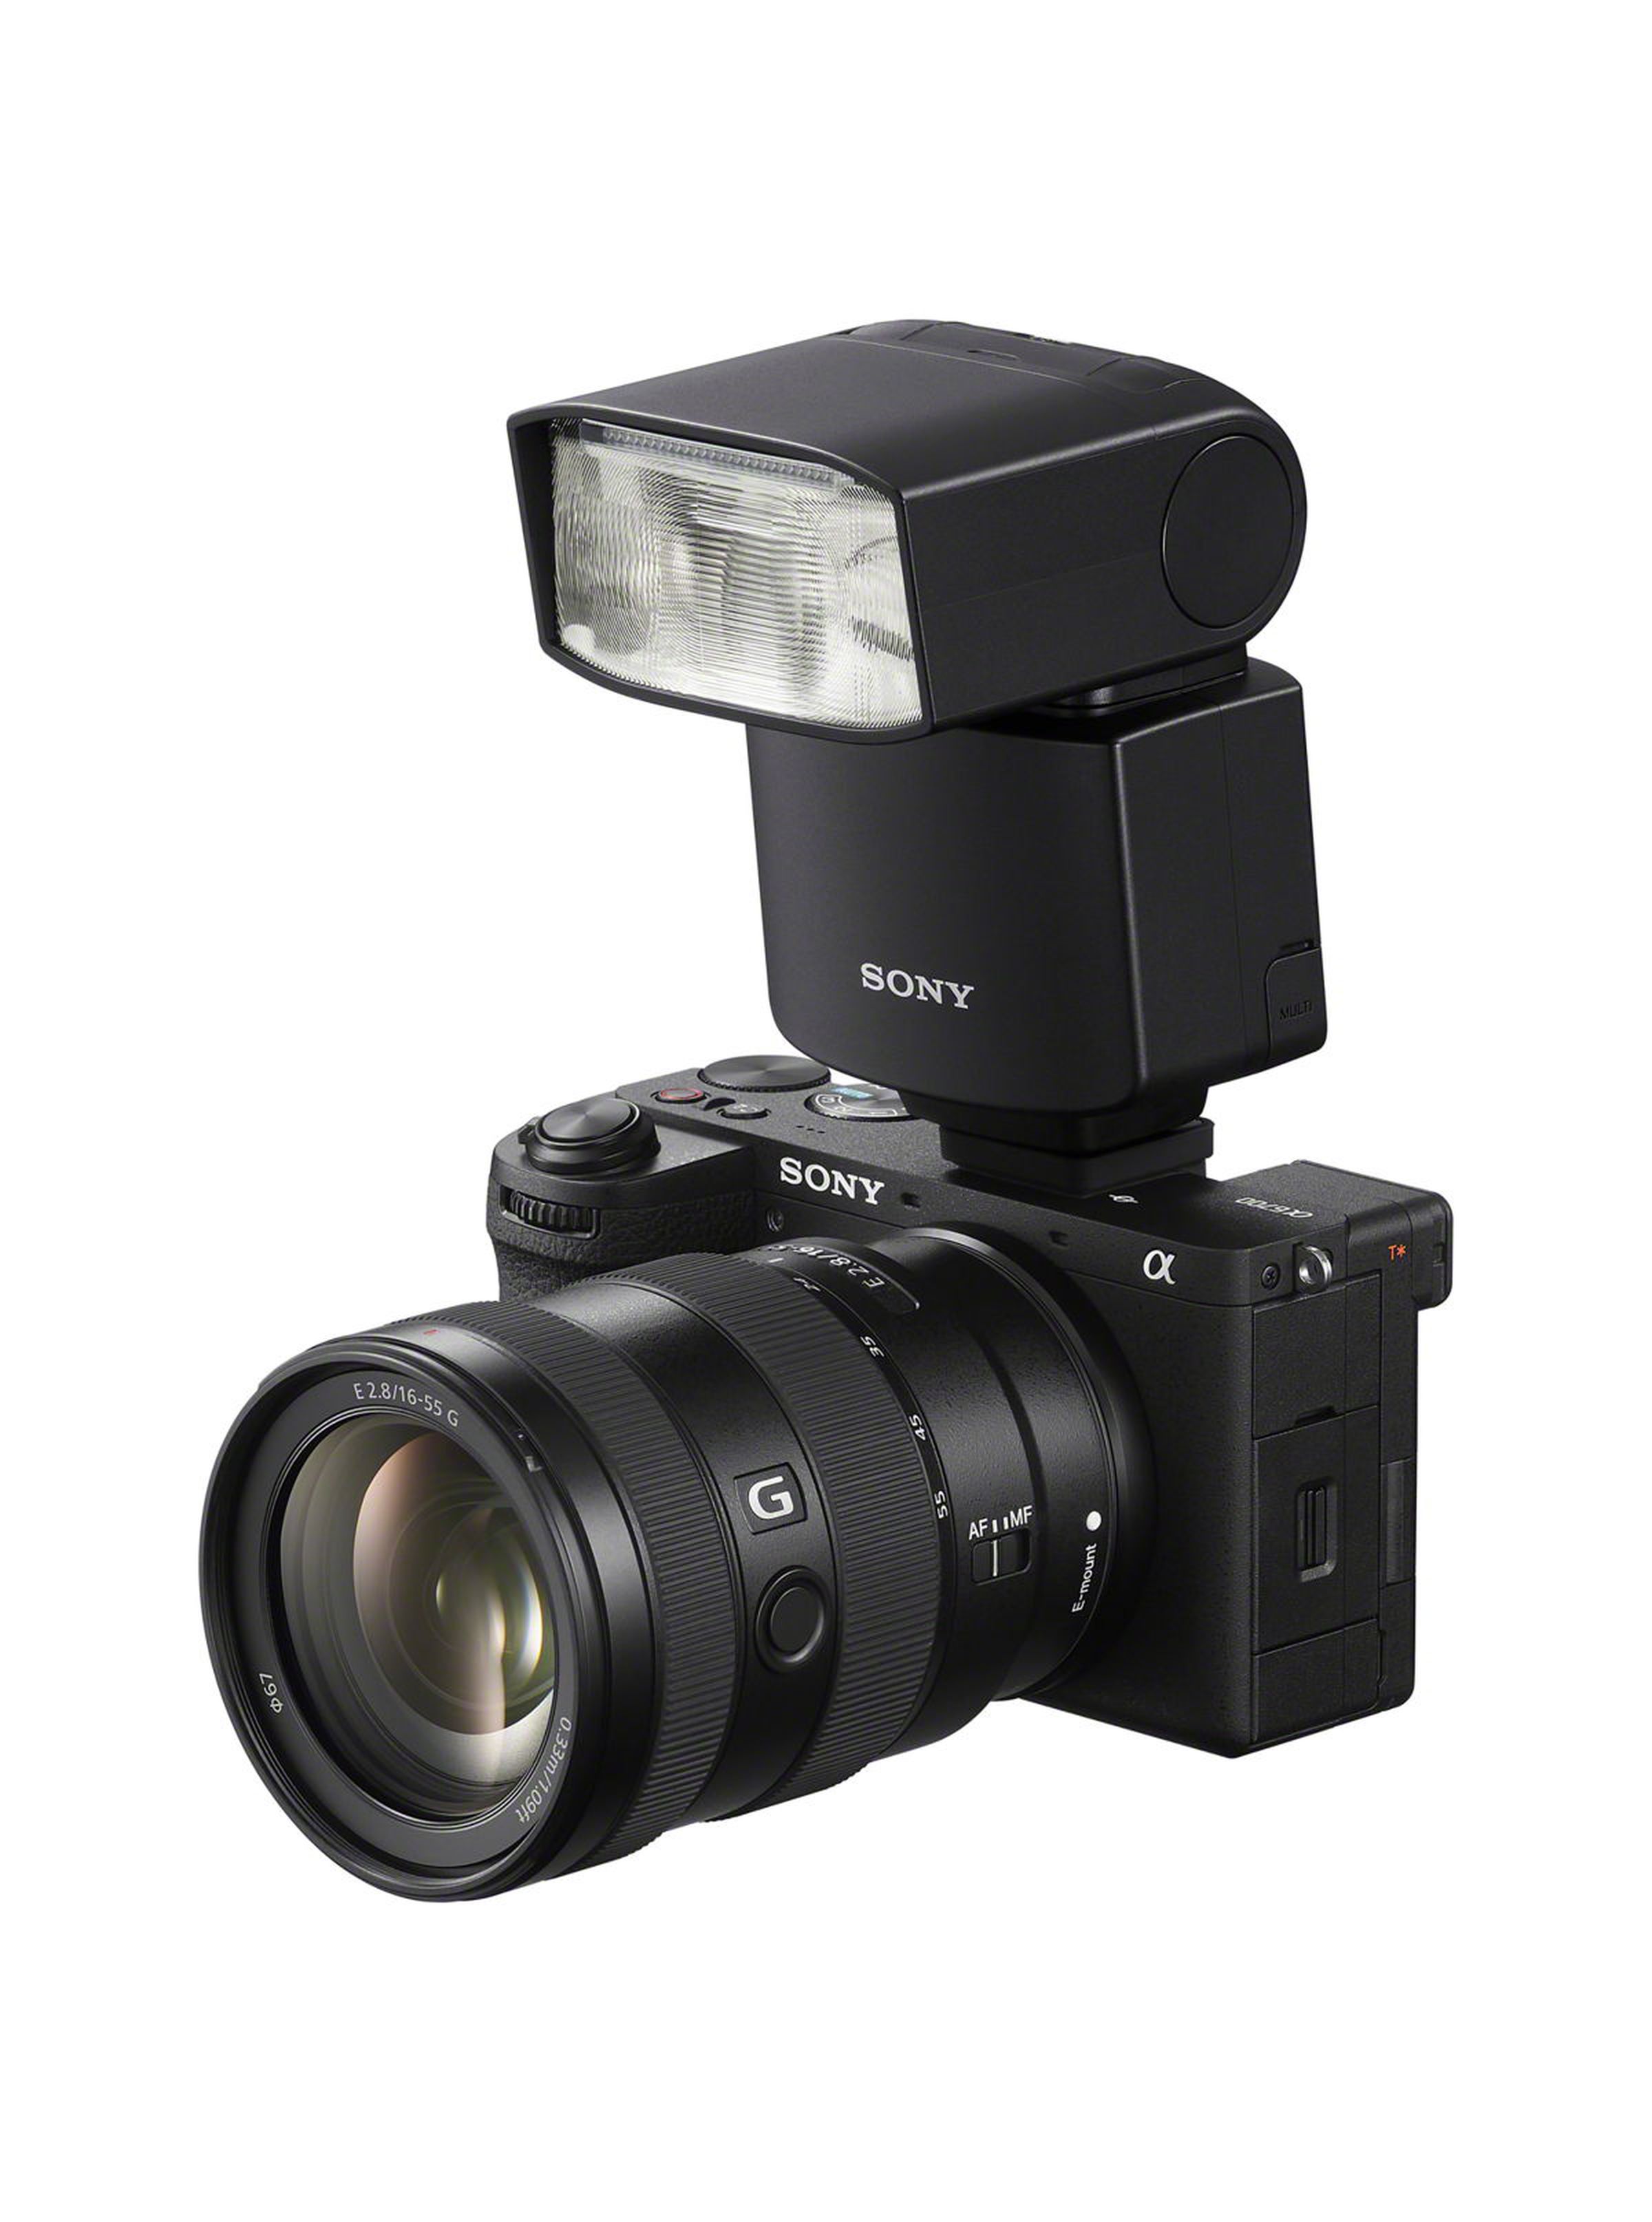 Three quarter view of the Sony A6700 showing a flash attachment.